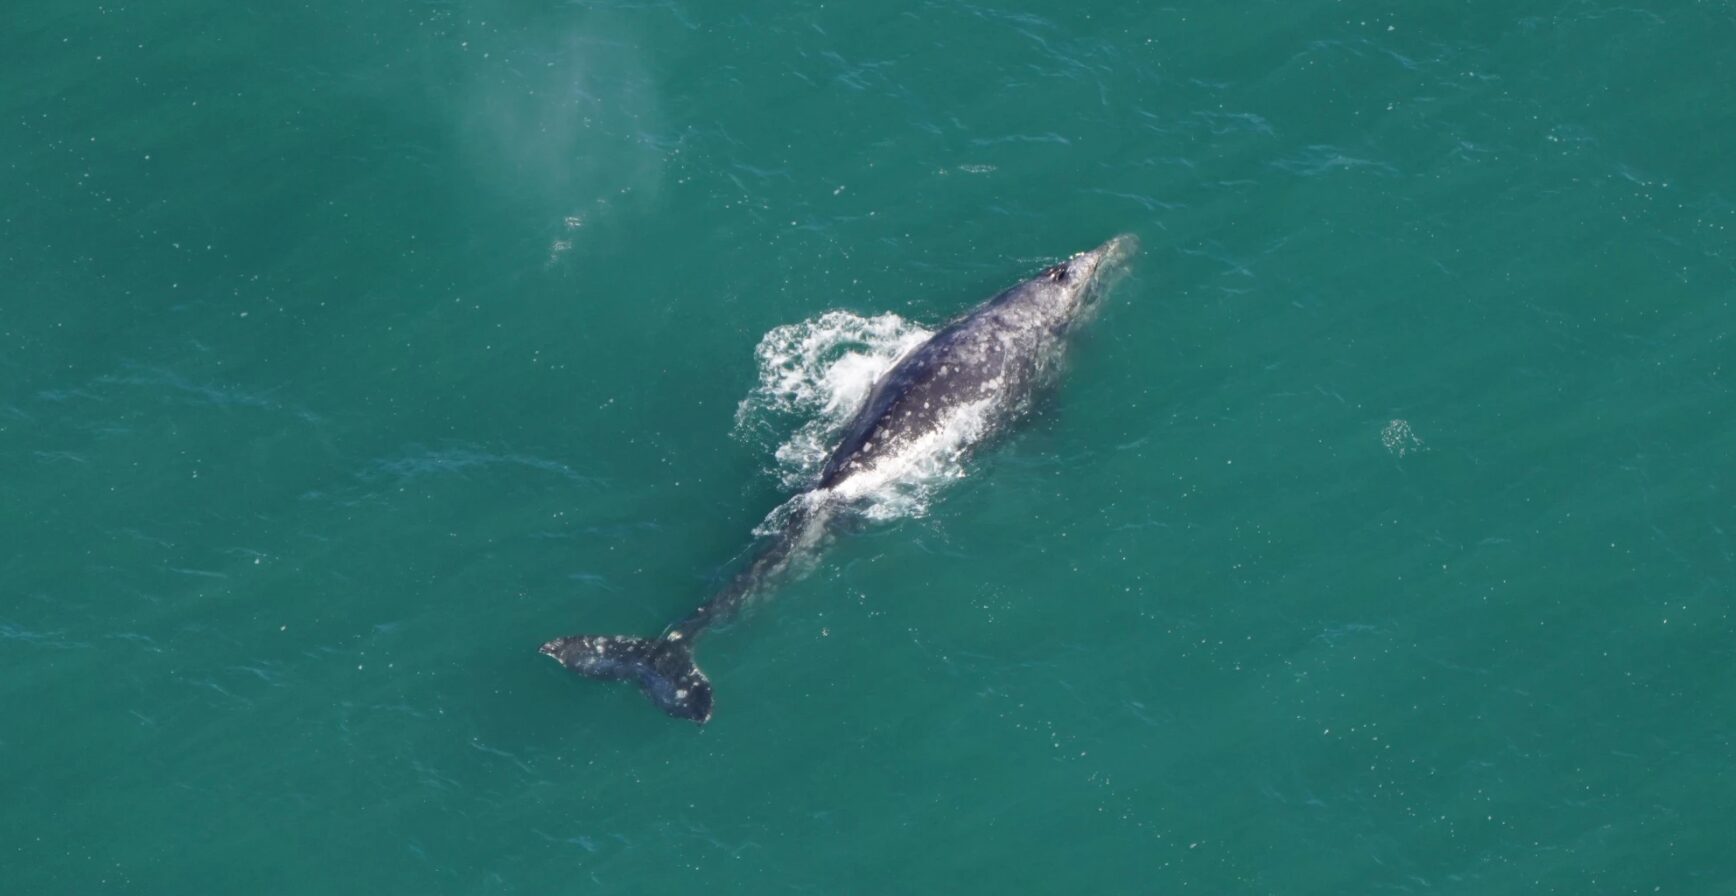 Thin-looking grey whale with white and light grey spots from the ocean. The water is a teal color.